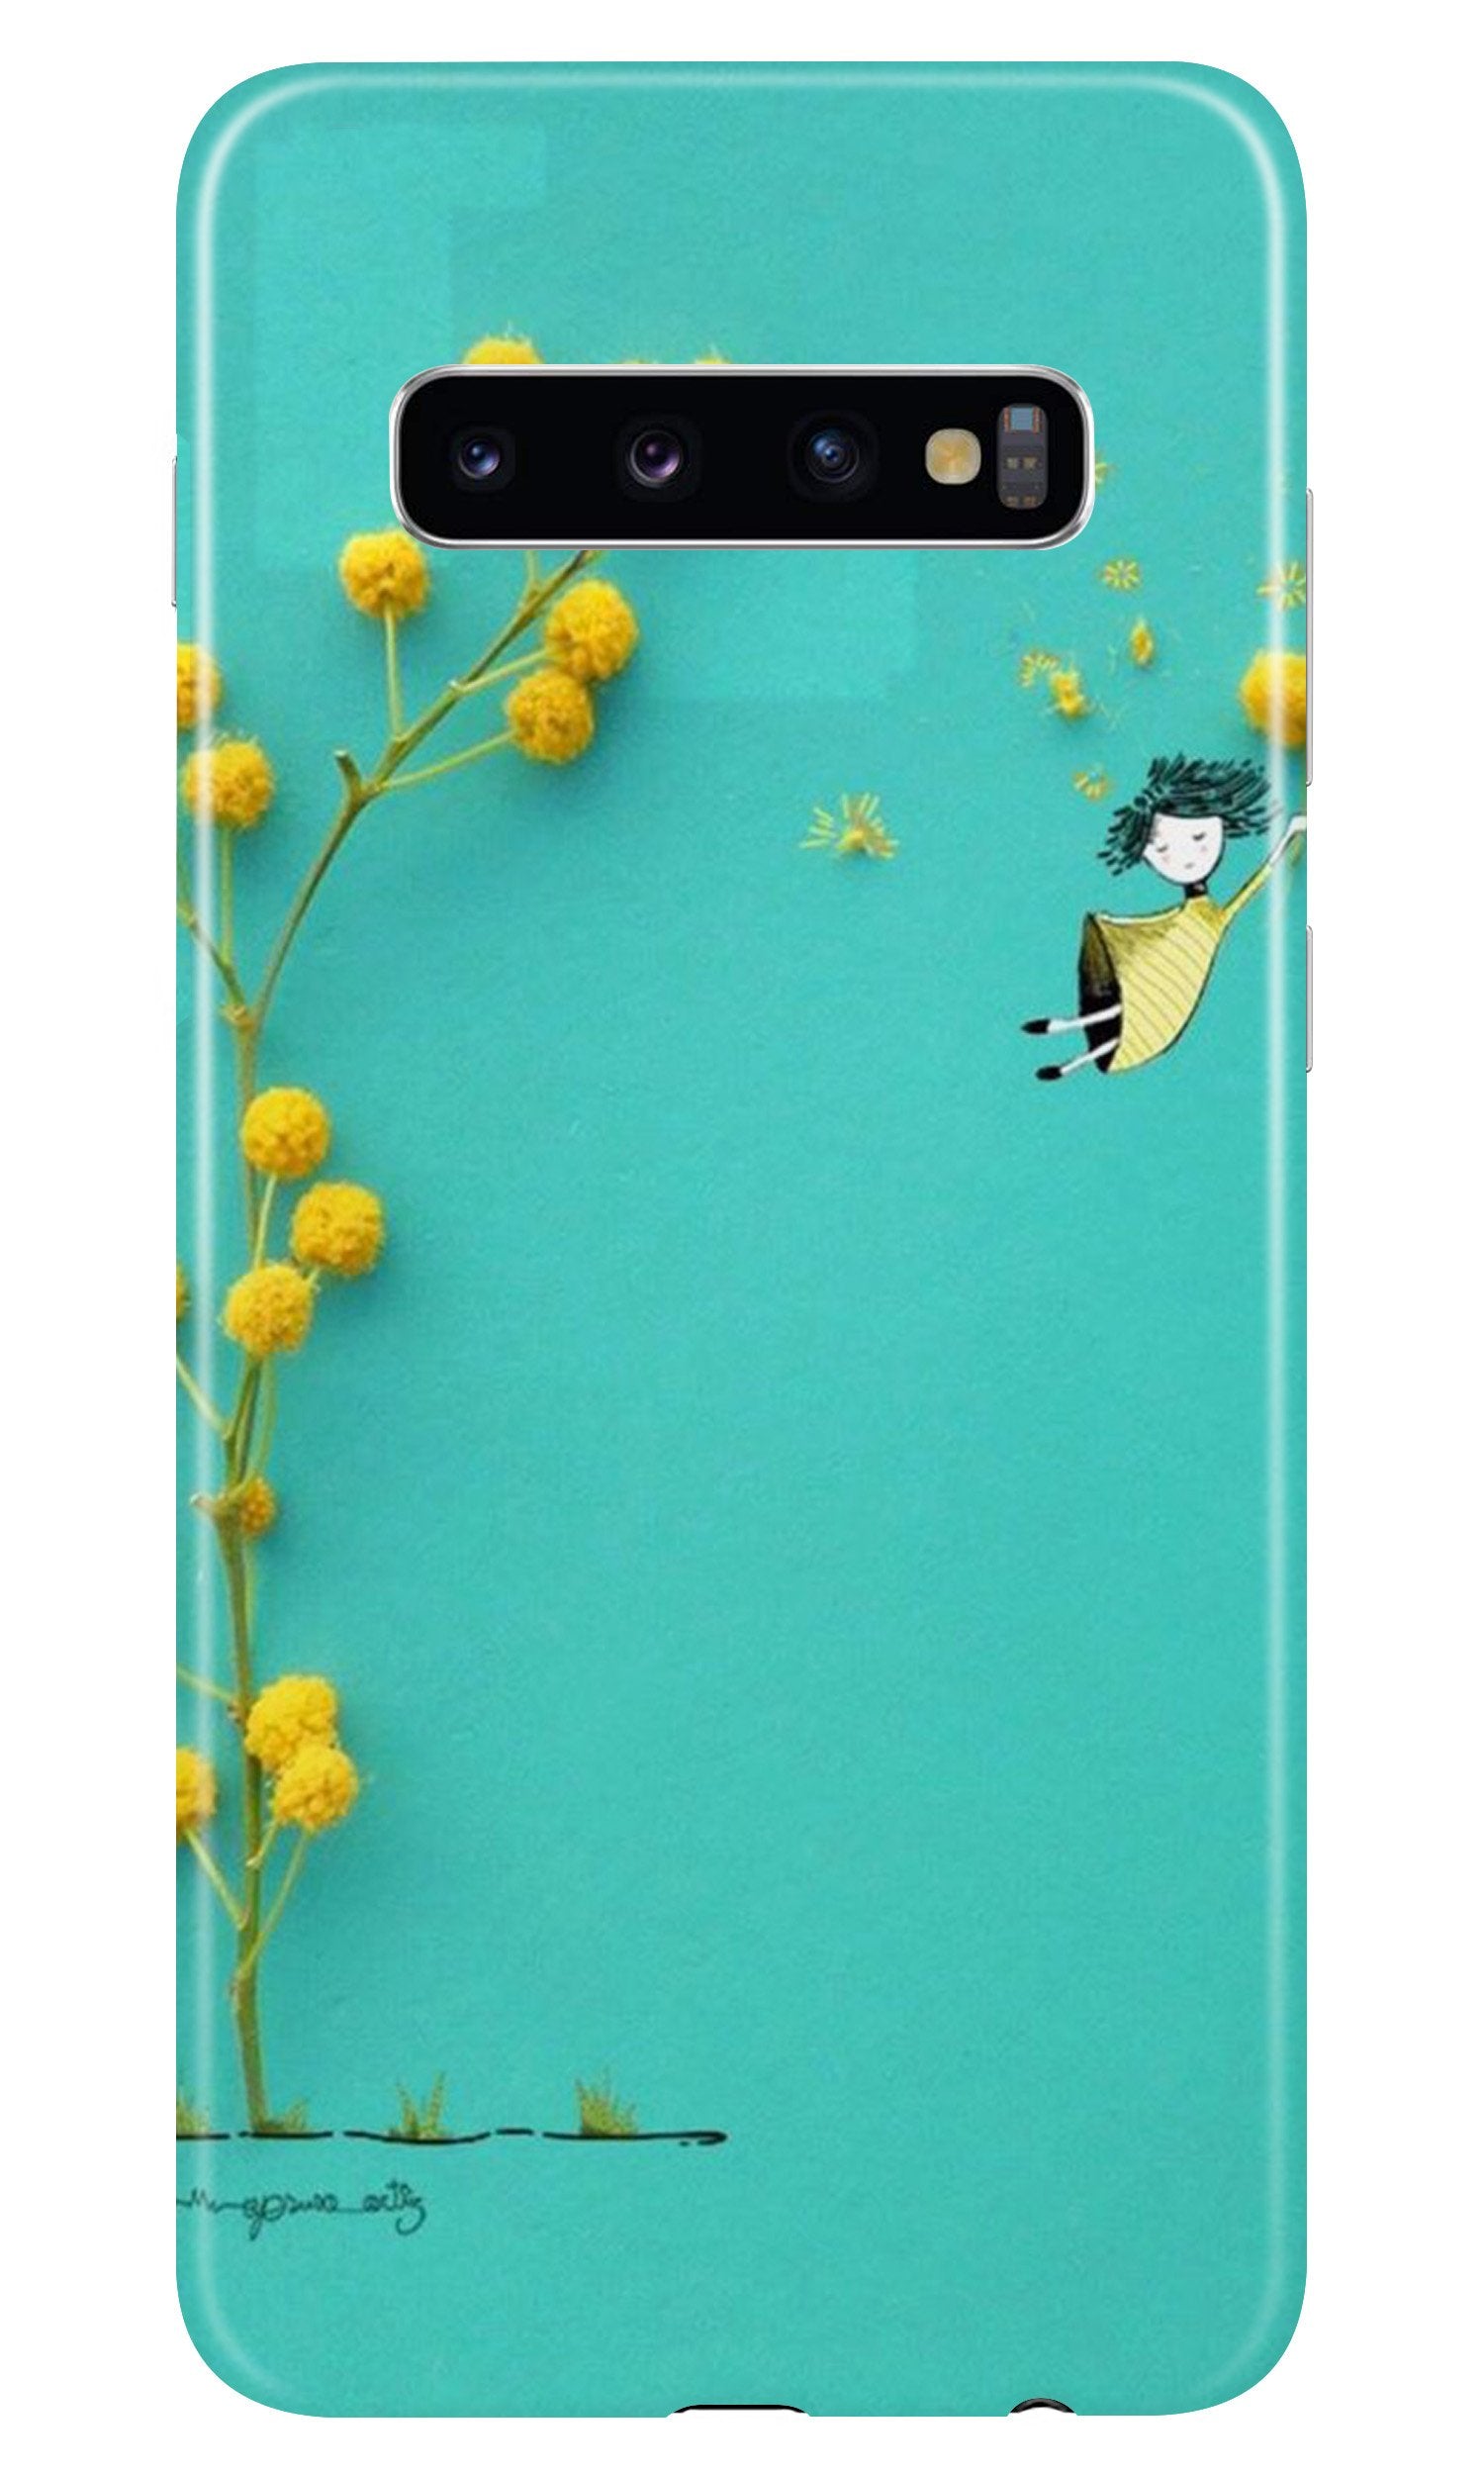 Flowers Girl Case for Samsung Galaxy S10 Plus (Design No. 216)